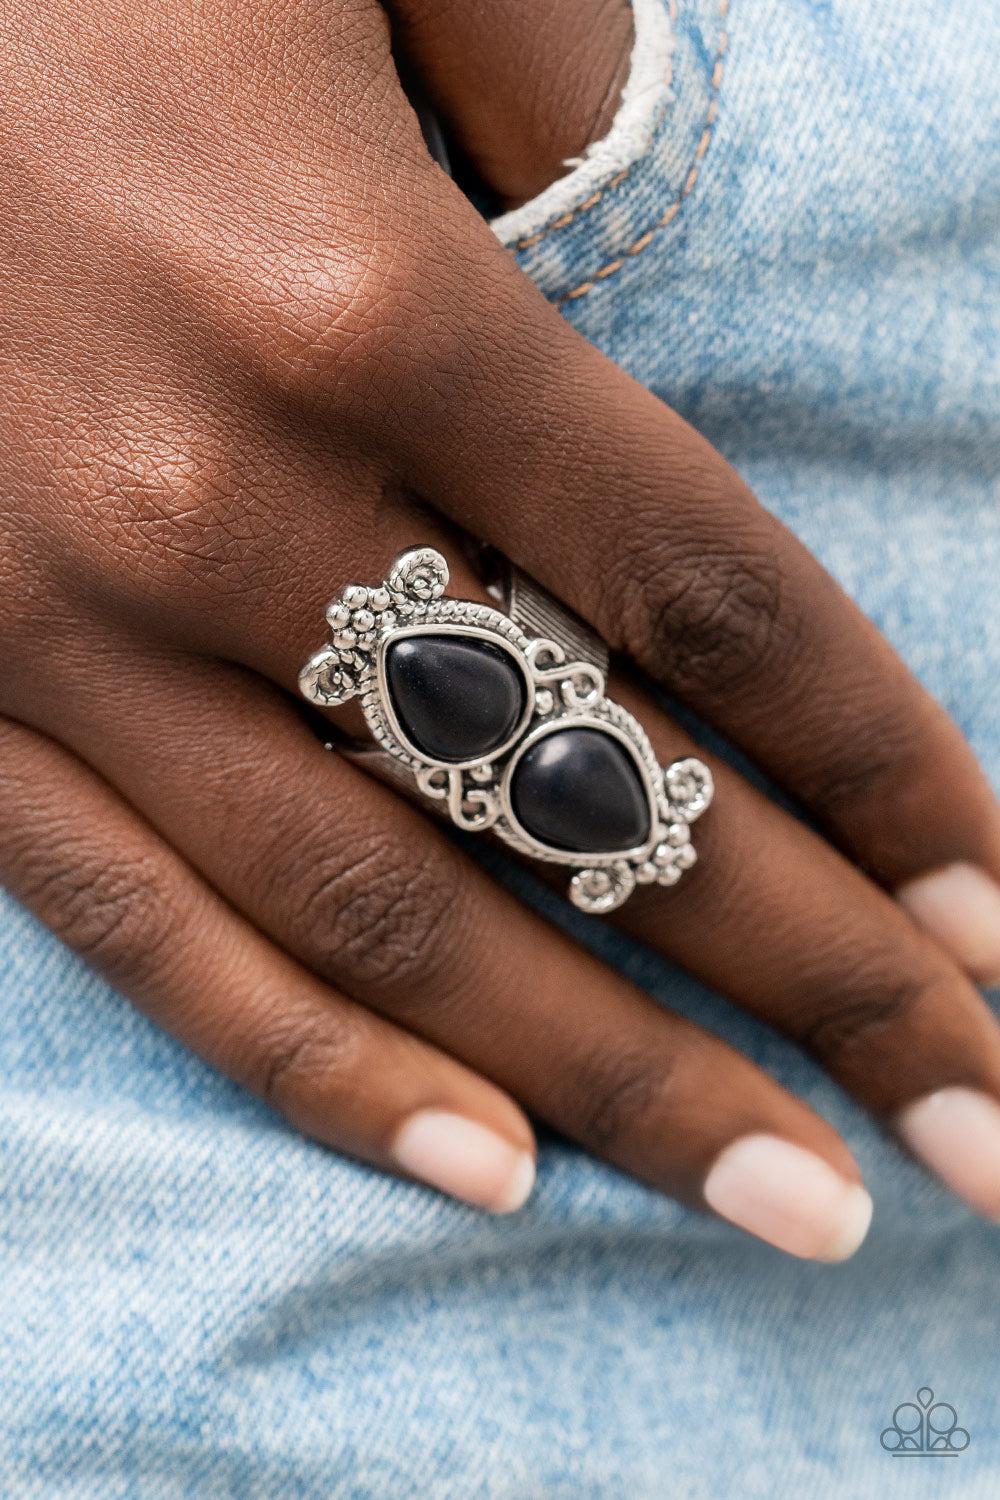 Adobe Garden Black Stone Ring - Paparazzi Accessories-on model - CarasShop.com - $5 Jewelry by Cara Jewels